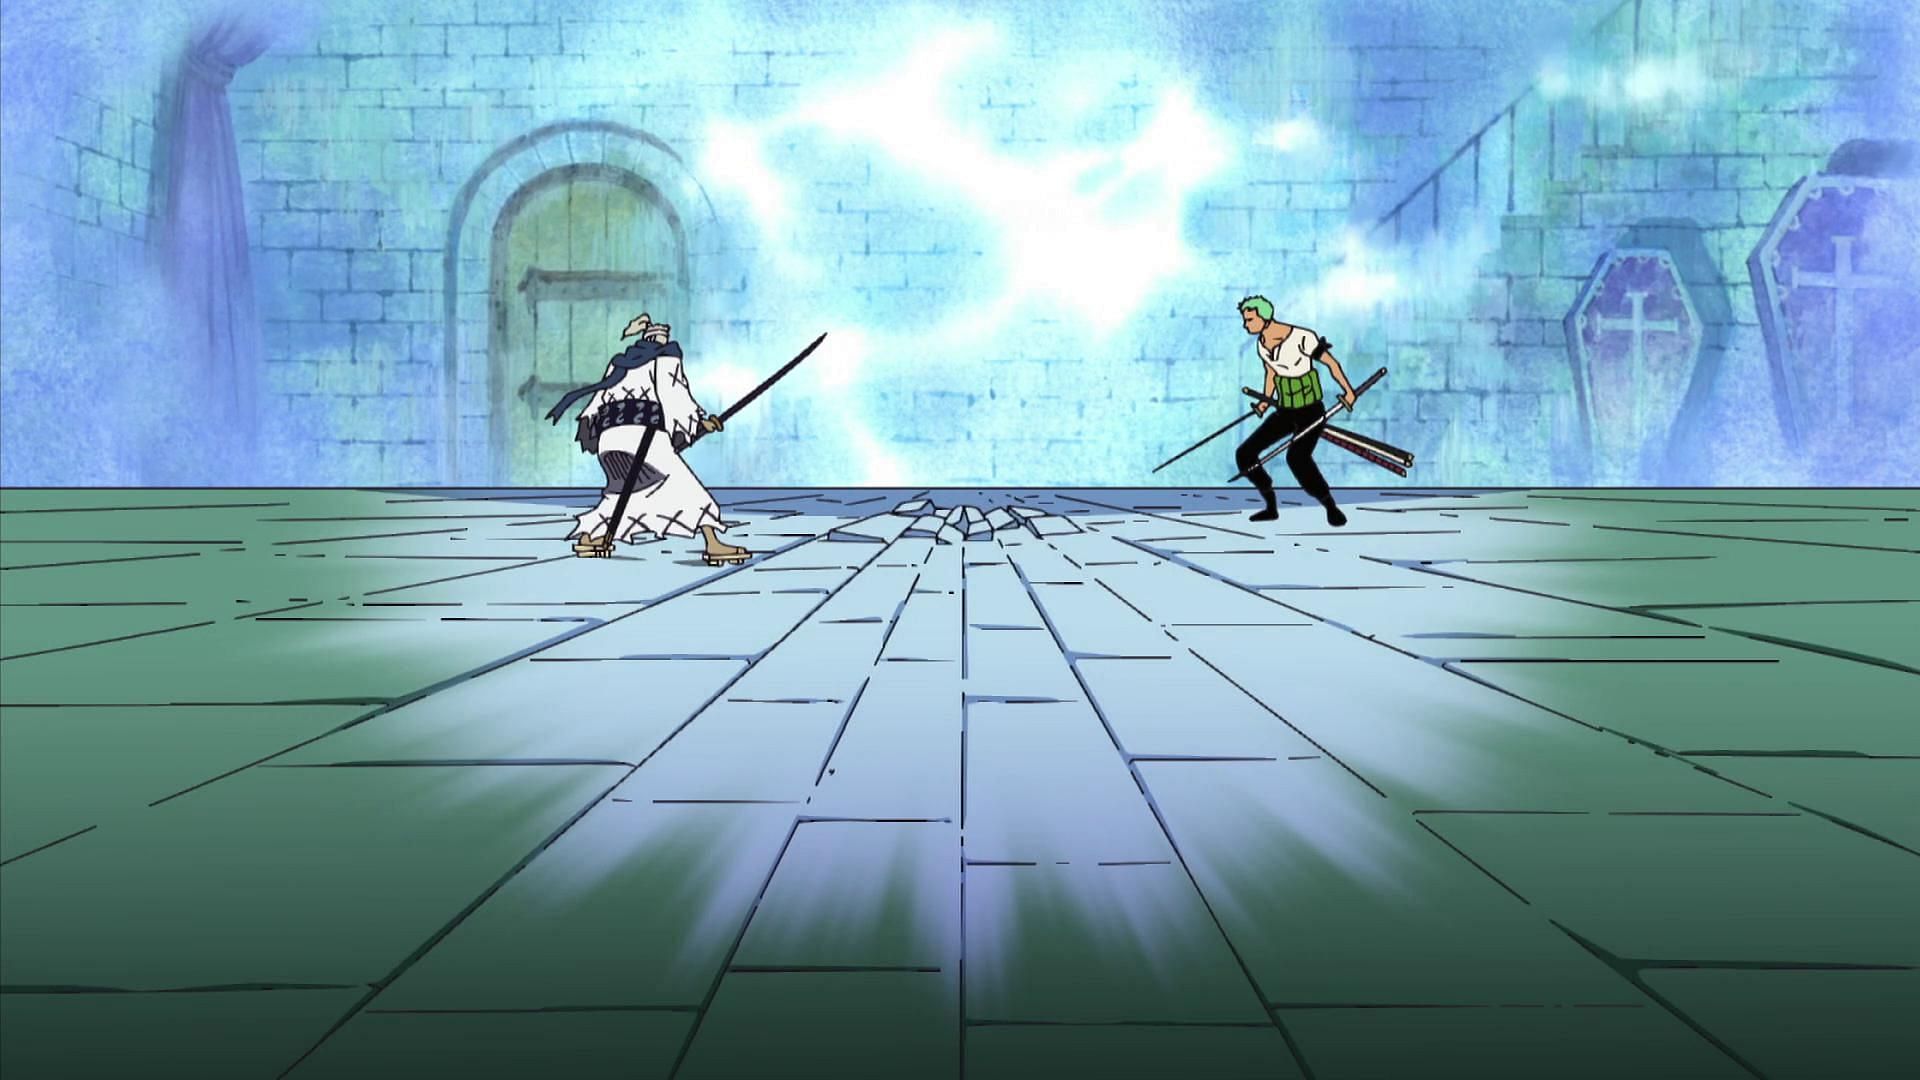 The fight between Zoro and Zombie Ryuma in Thriller Bark (Image via Toei Animation, One Piece)